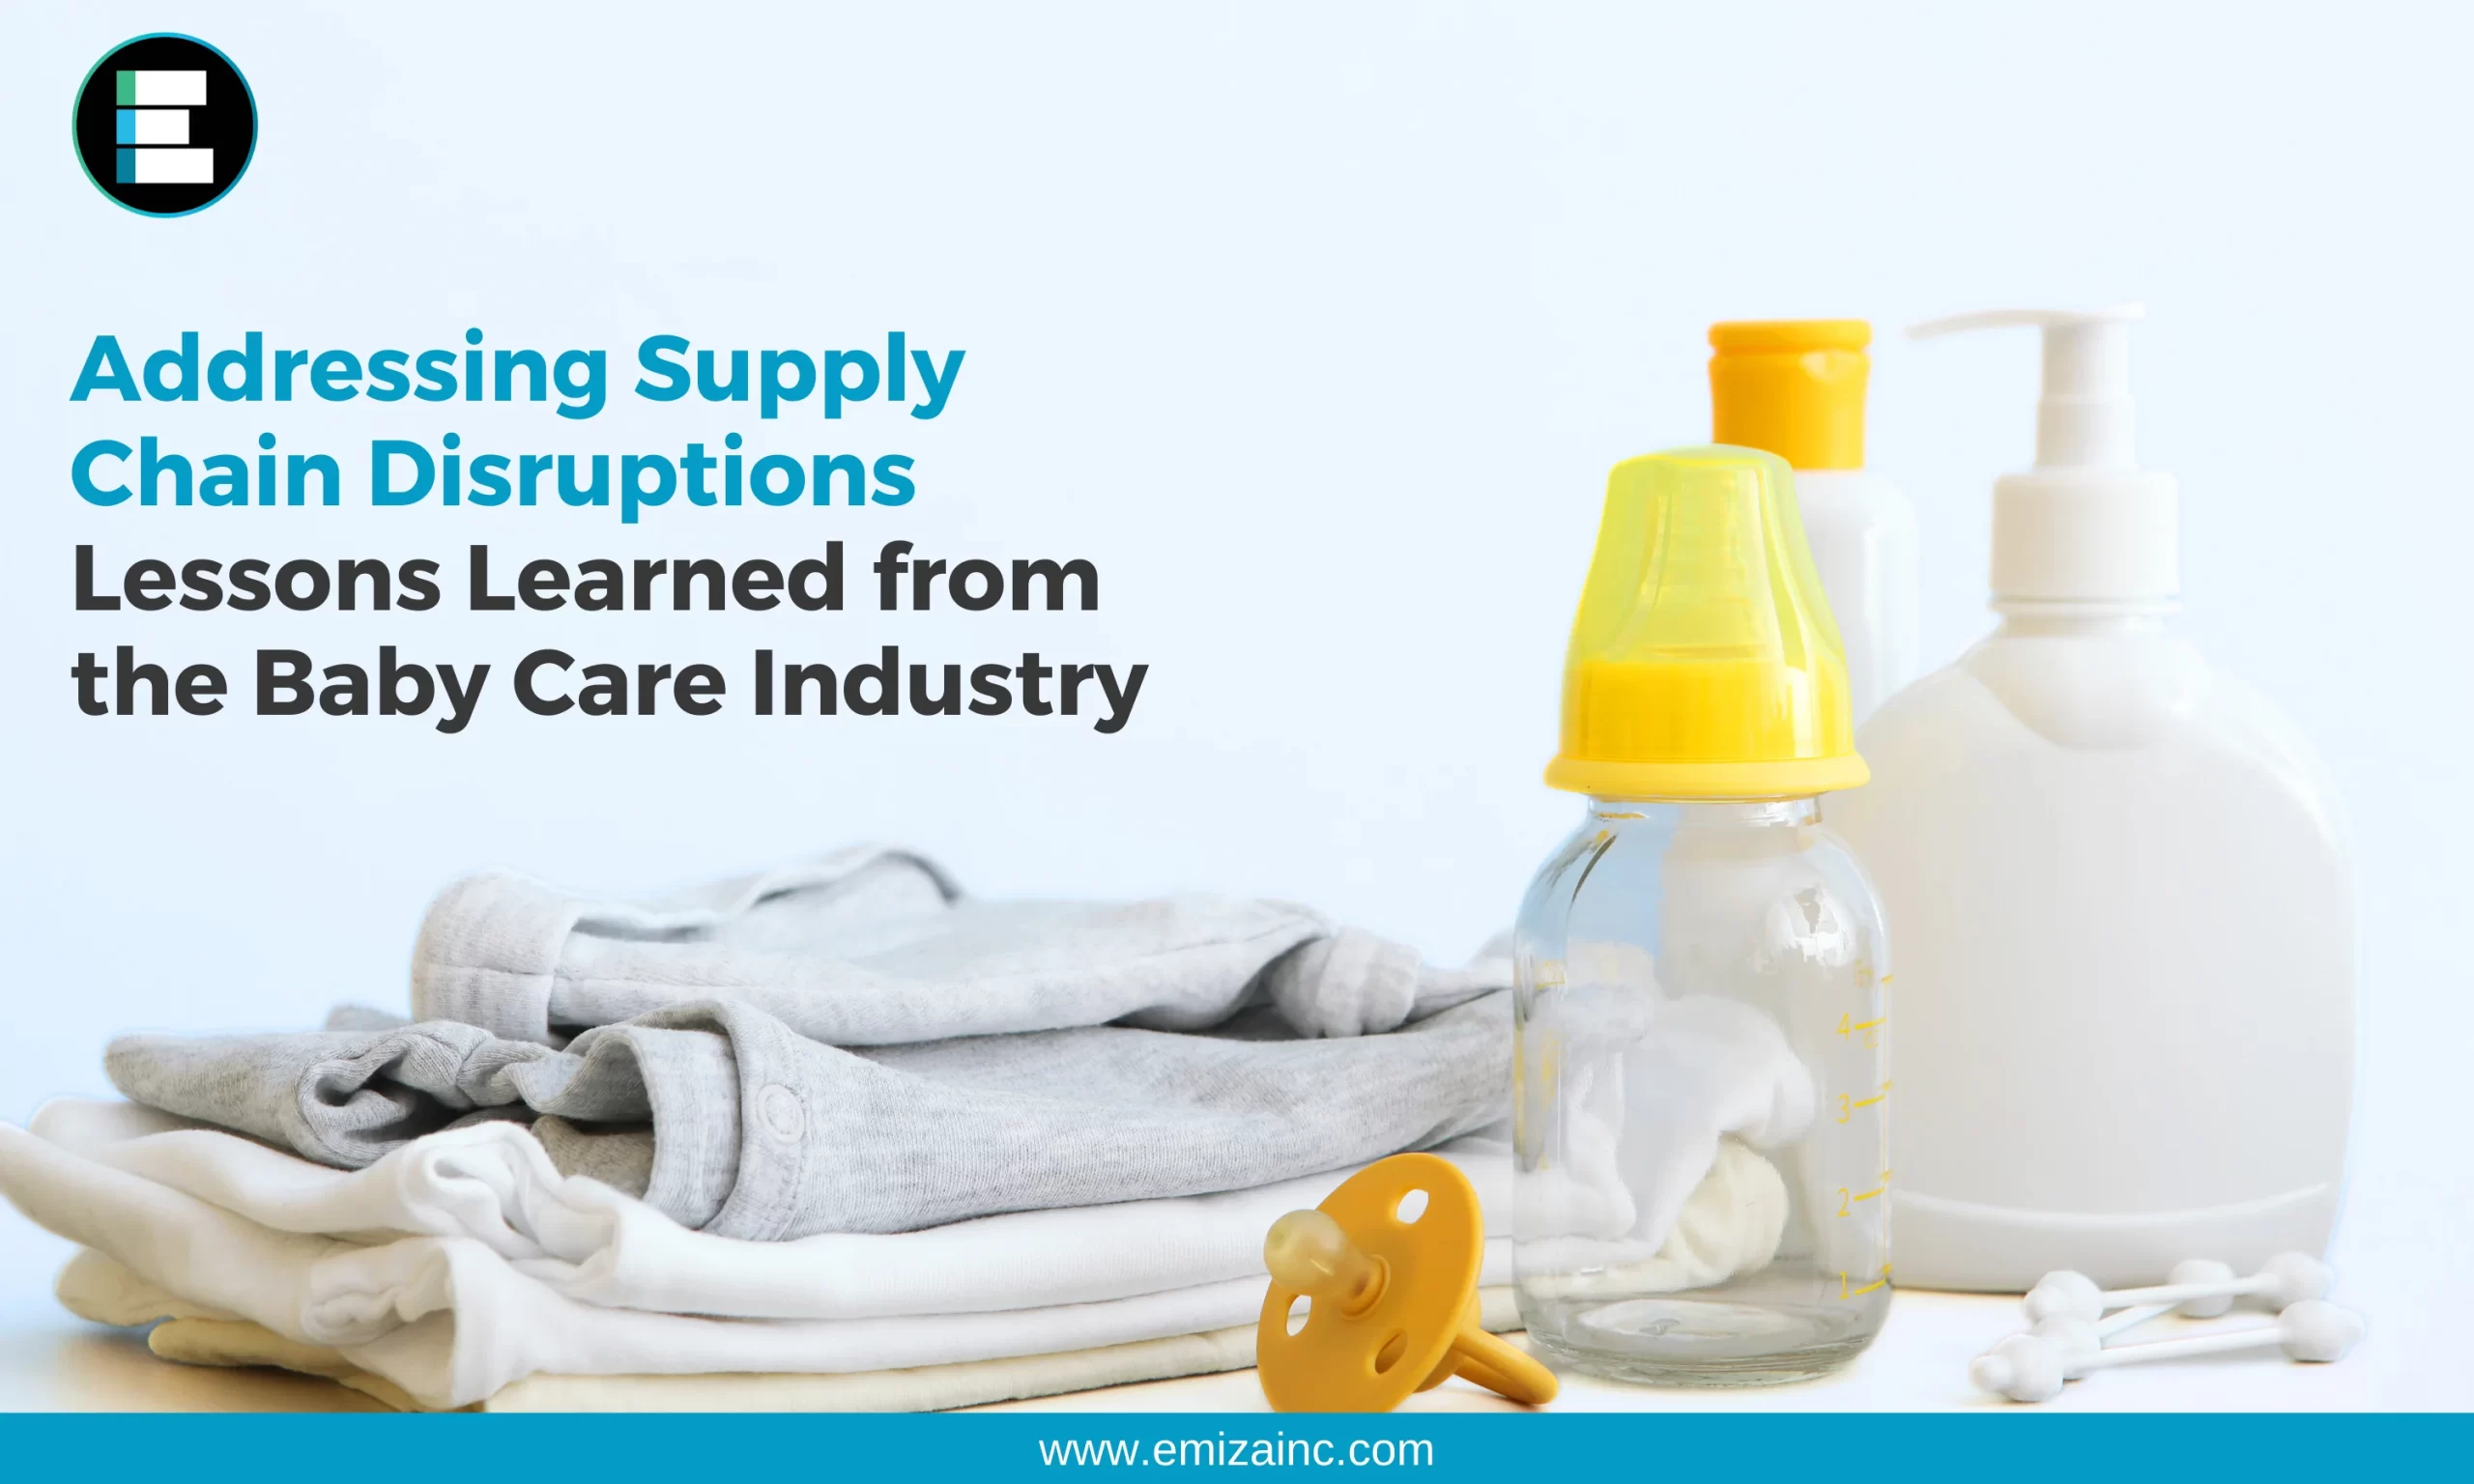 Addressing Supply Chain Disruptions: Lessons Learned from the Baby Care Industry